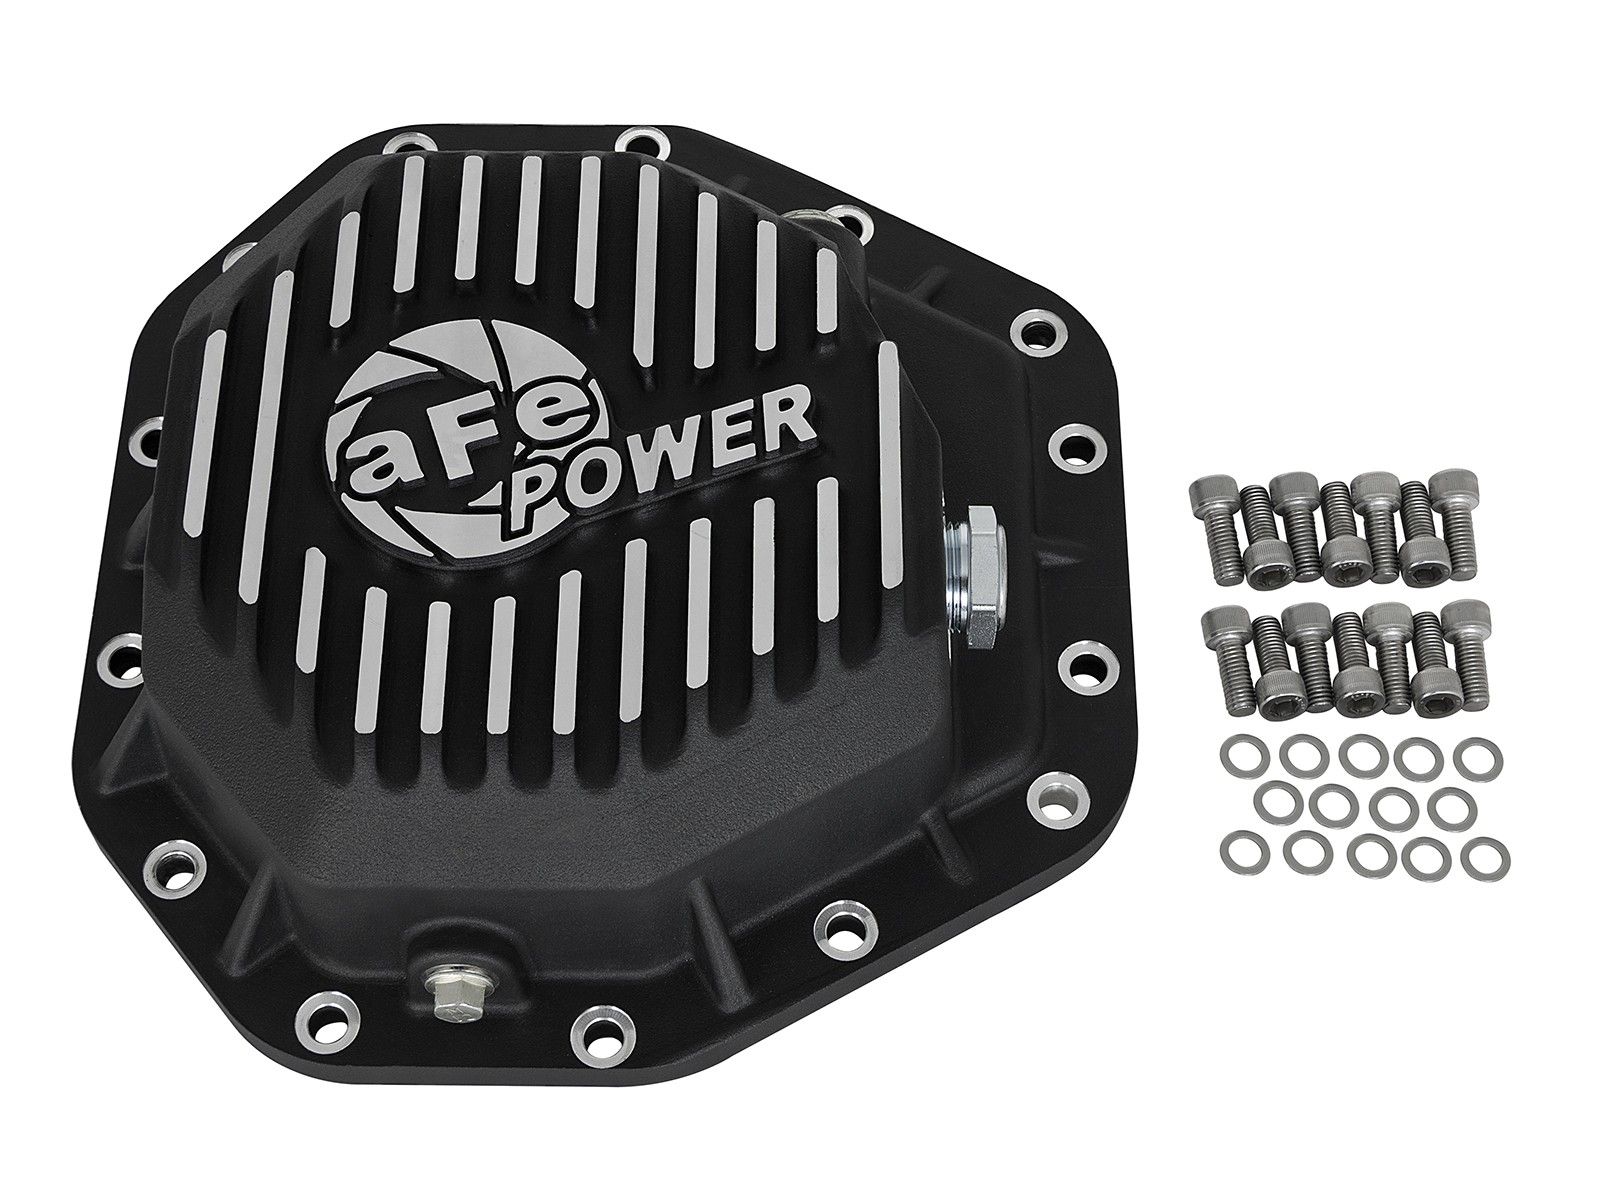 2017-2019 Ford F-350 Super Duty Turbo Diesel V8 6.7L Rear Differential Cover Machined Fins Pro Series